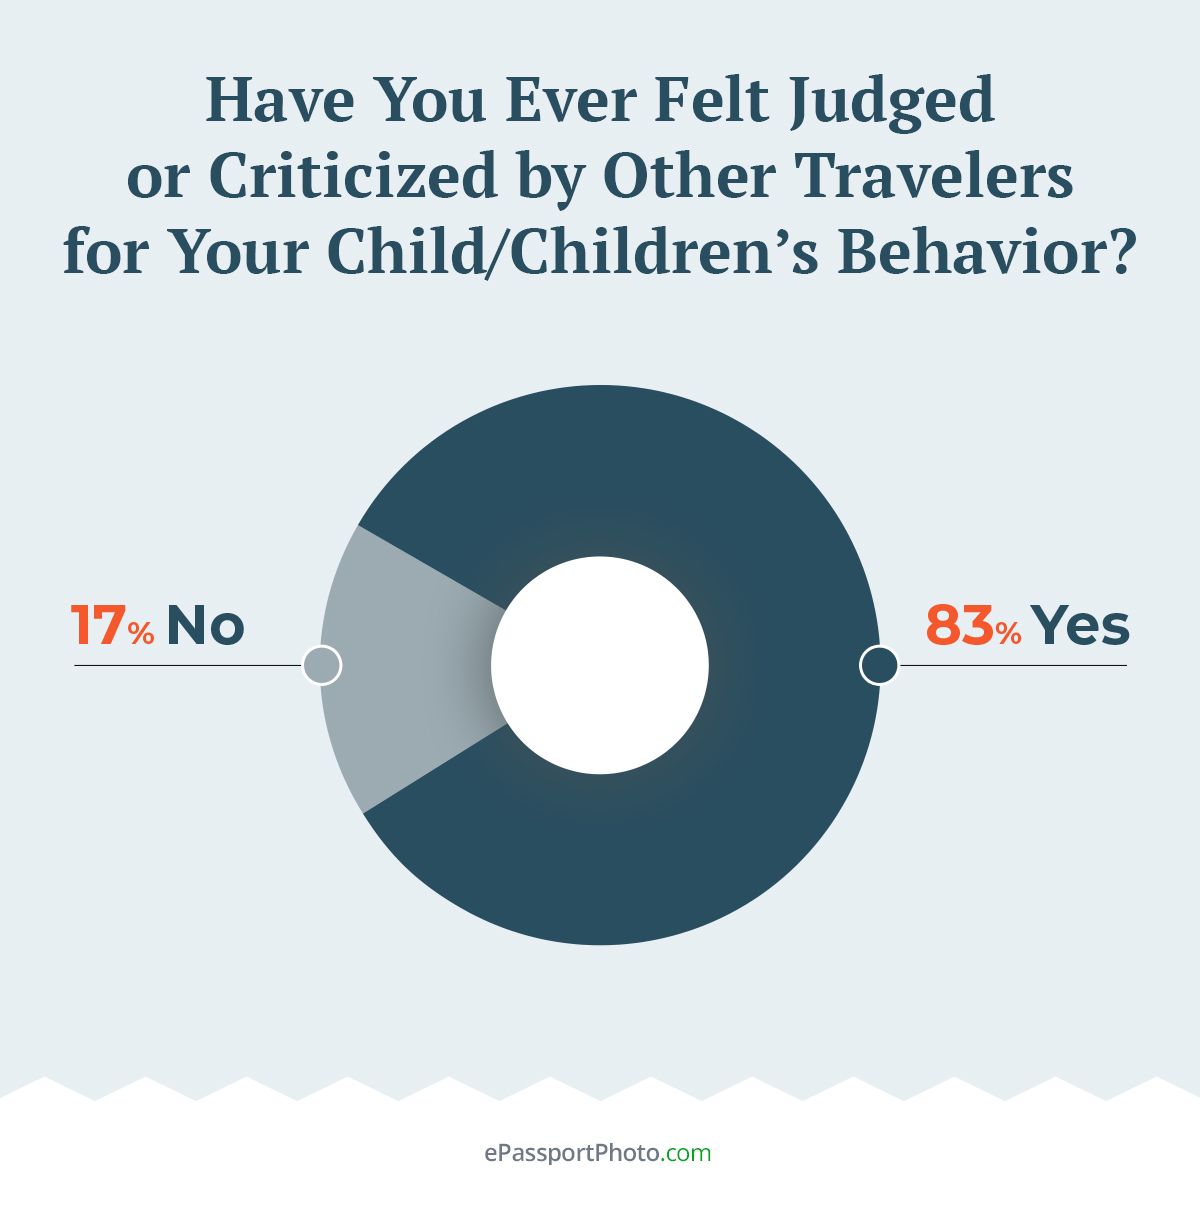 83% of parents have felt judged or criticized by other travelers for their little ones’ behavior at least once in their lifetime